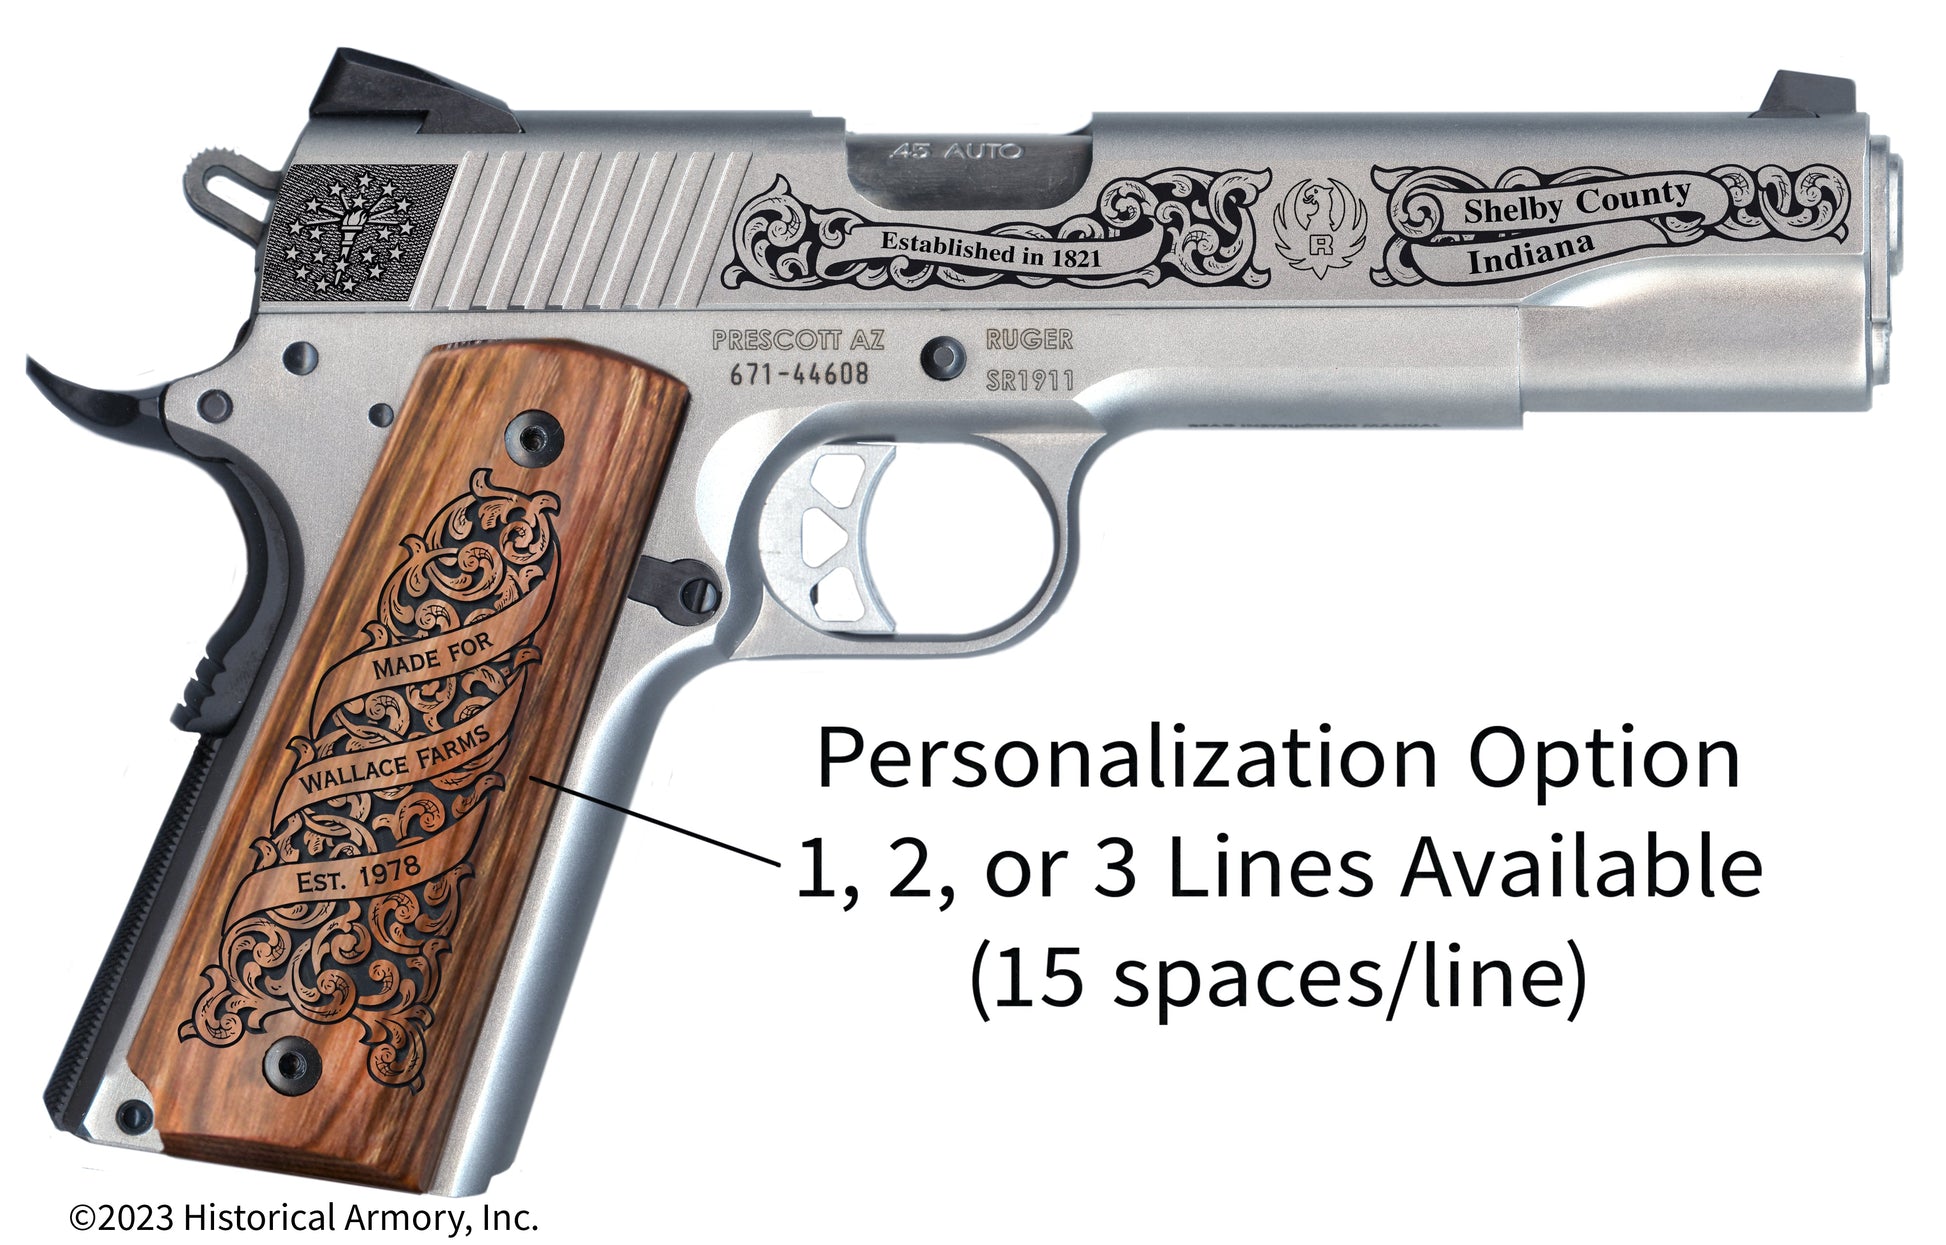 Shelby County Indiana Personalized Engraved .45 Auto Ruger 1911